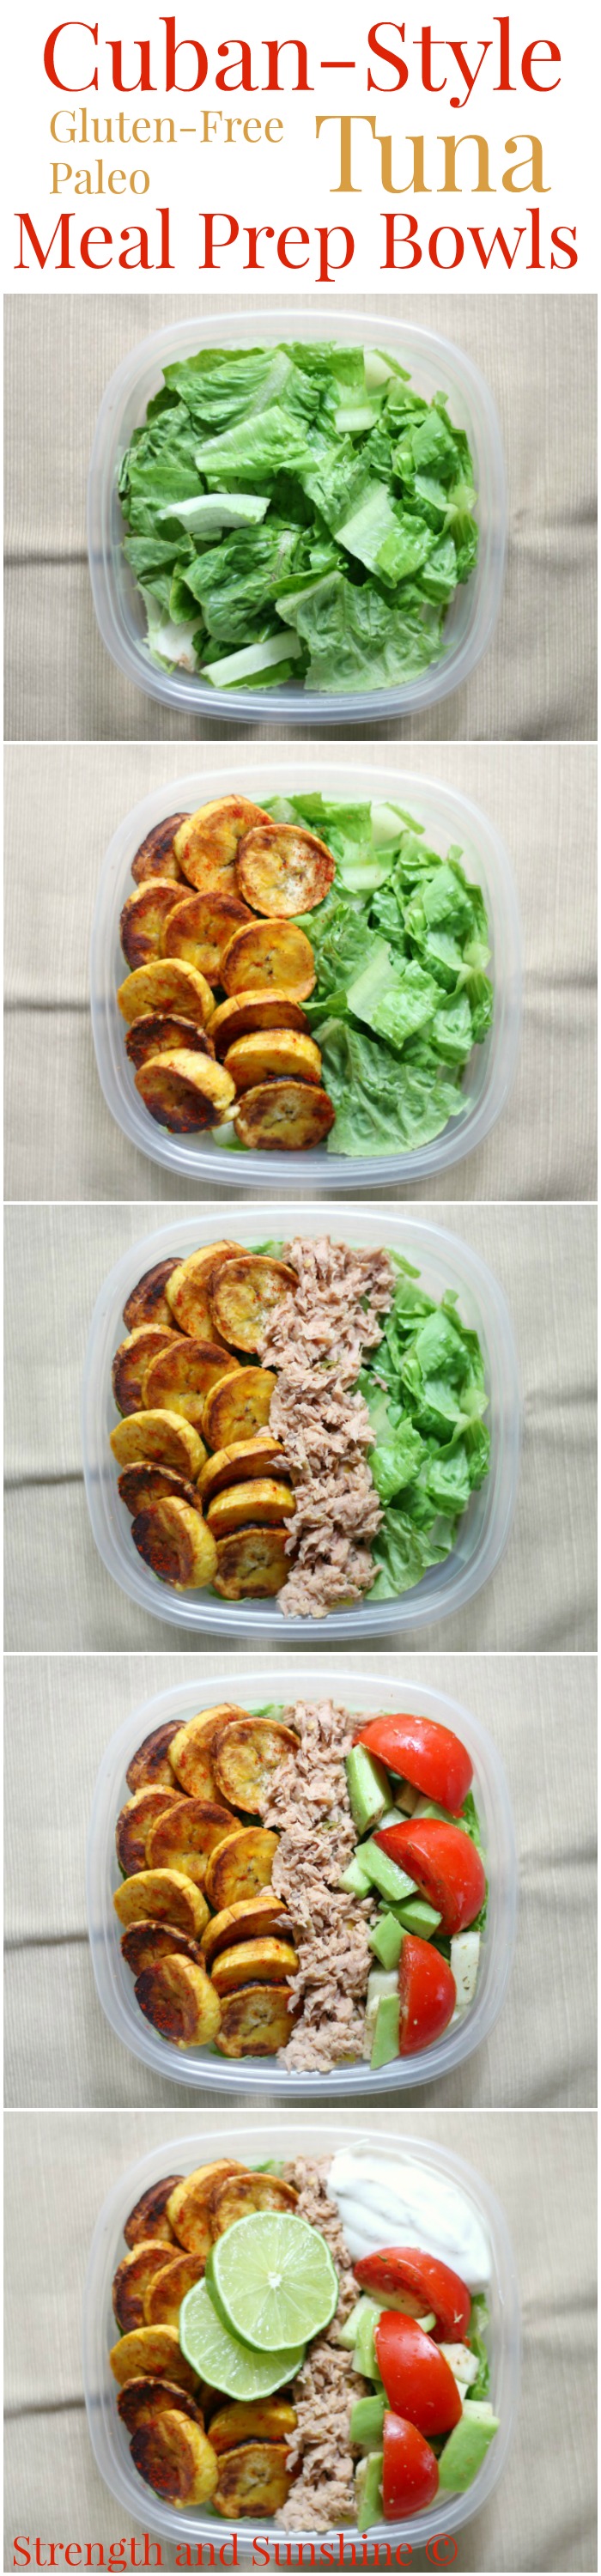 Cuban-Style Tuna Meal Prep Bowls (Gluten-Free, Paleo) | Strength and Sunshine @RebeccaGF666 A healthy meal prep recipe in a pinch! These Cuban-Style Tuna Meal Prep Bowls are gluten-free, paleo, and perfect for a well-rounded lunch! With plantain chips, fresh veggies, jalapeno tuna, and a zesty dairy-free yogurt, you’ll be powering through that midday slump! #glutenfree #paleo #tuna #mealprep ad